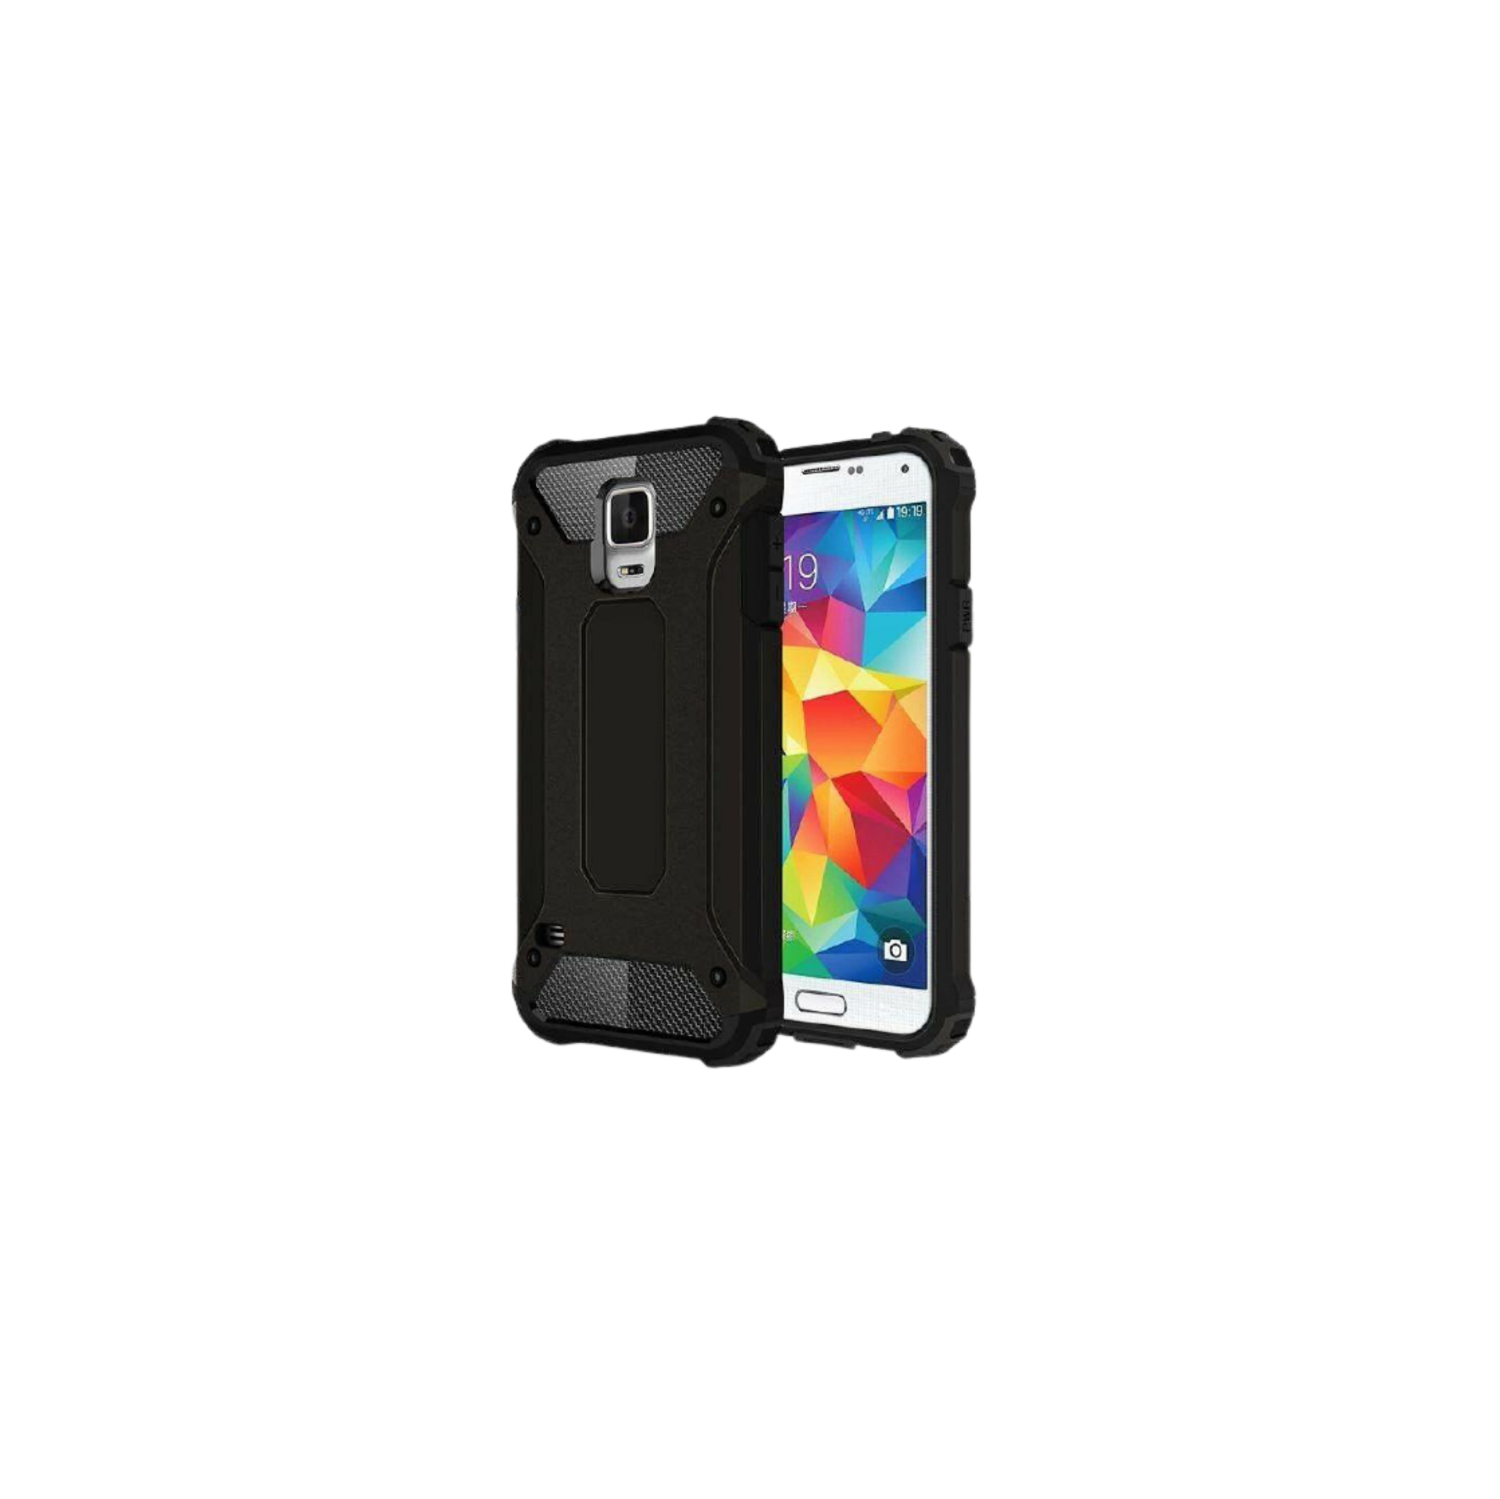 For Samsung Galaxy S5 / S6 Case - Dual Layer Hybrid Shockproof Armor Cover